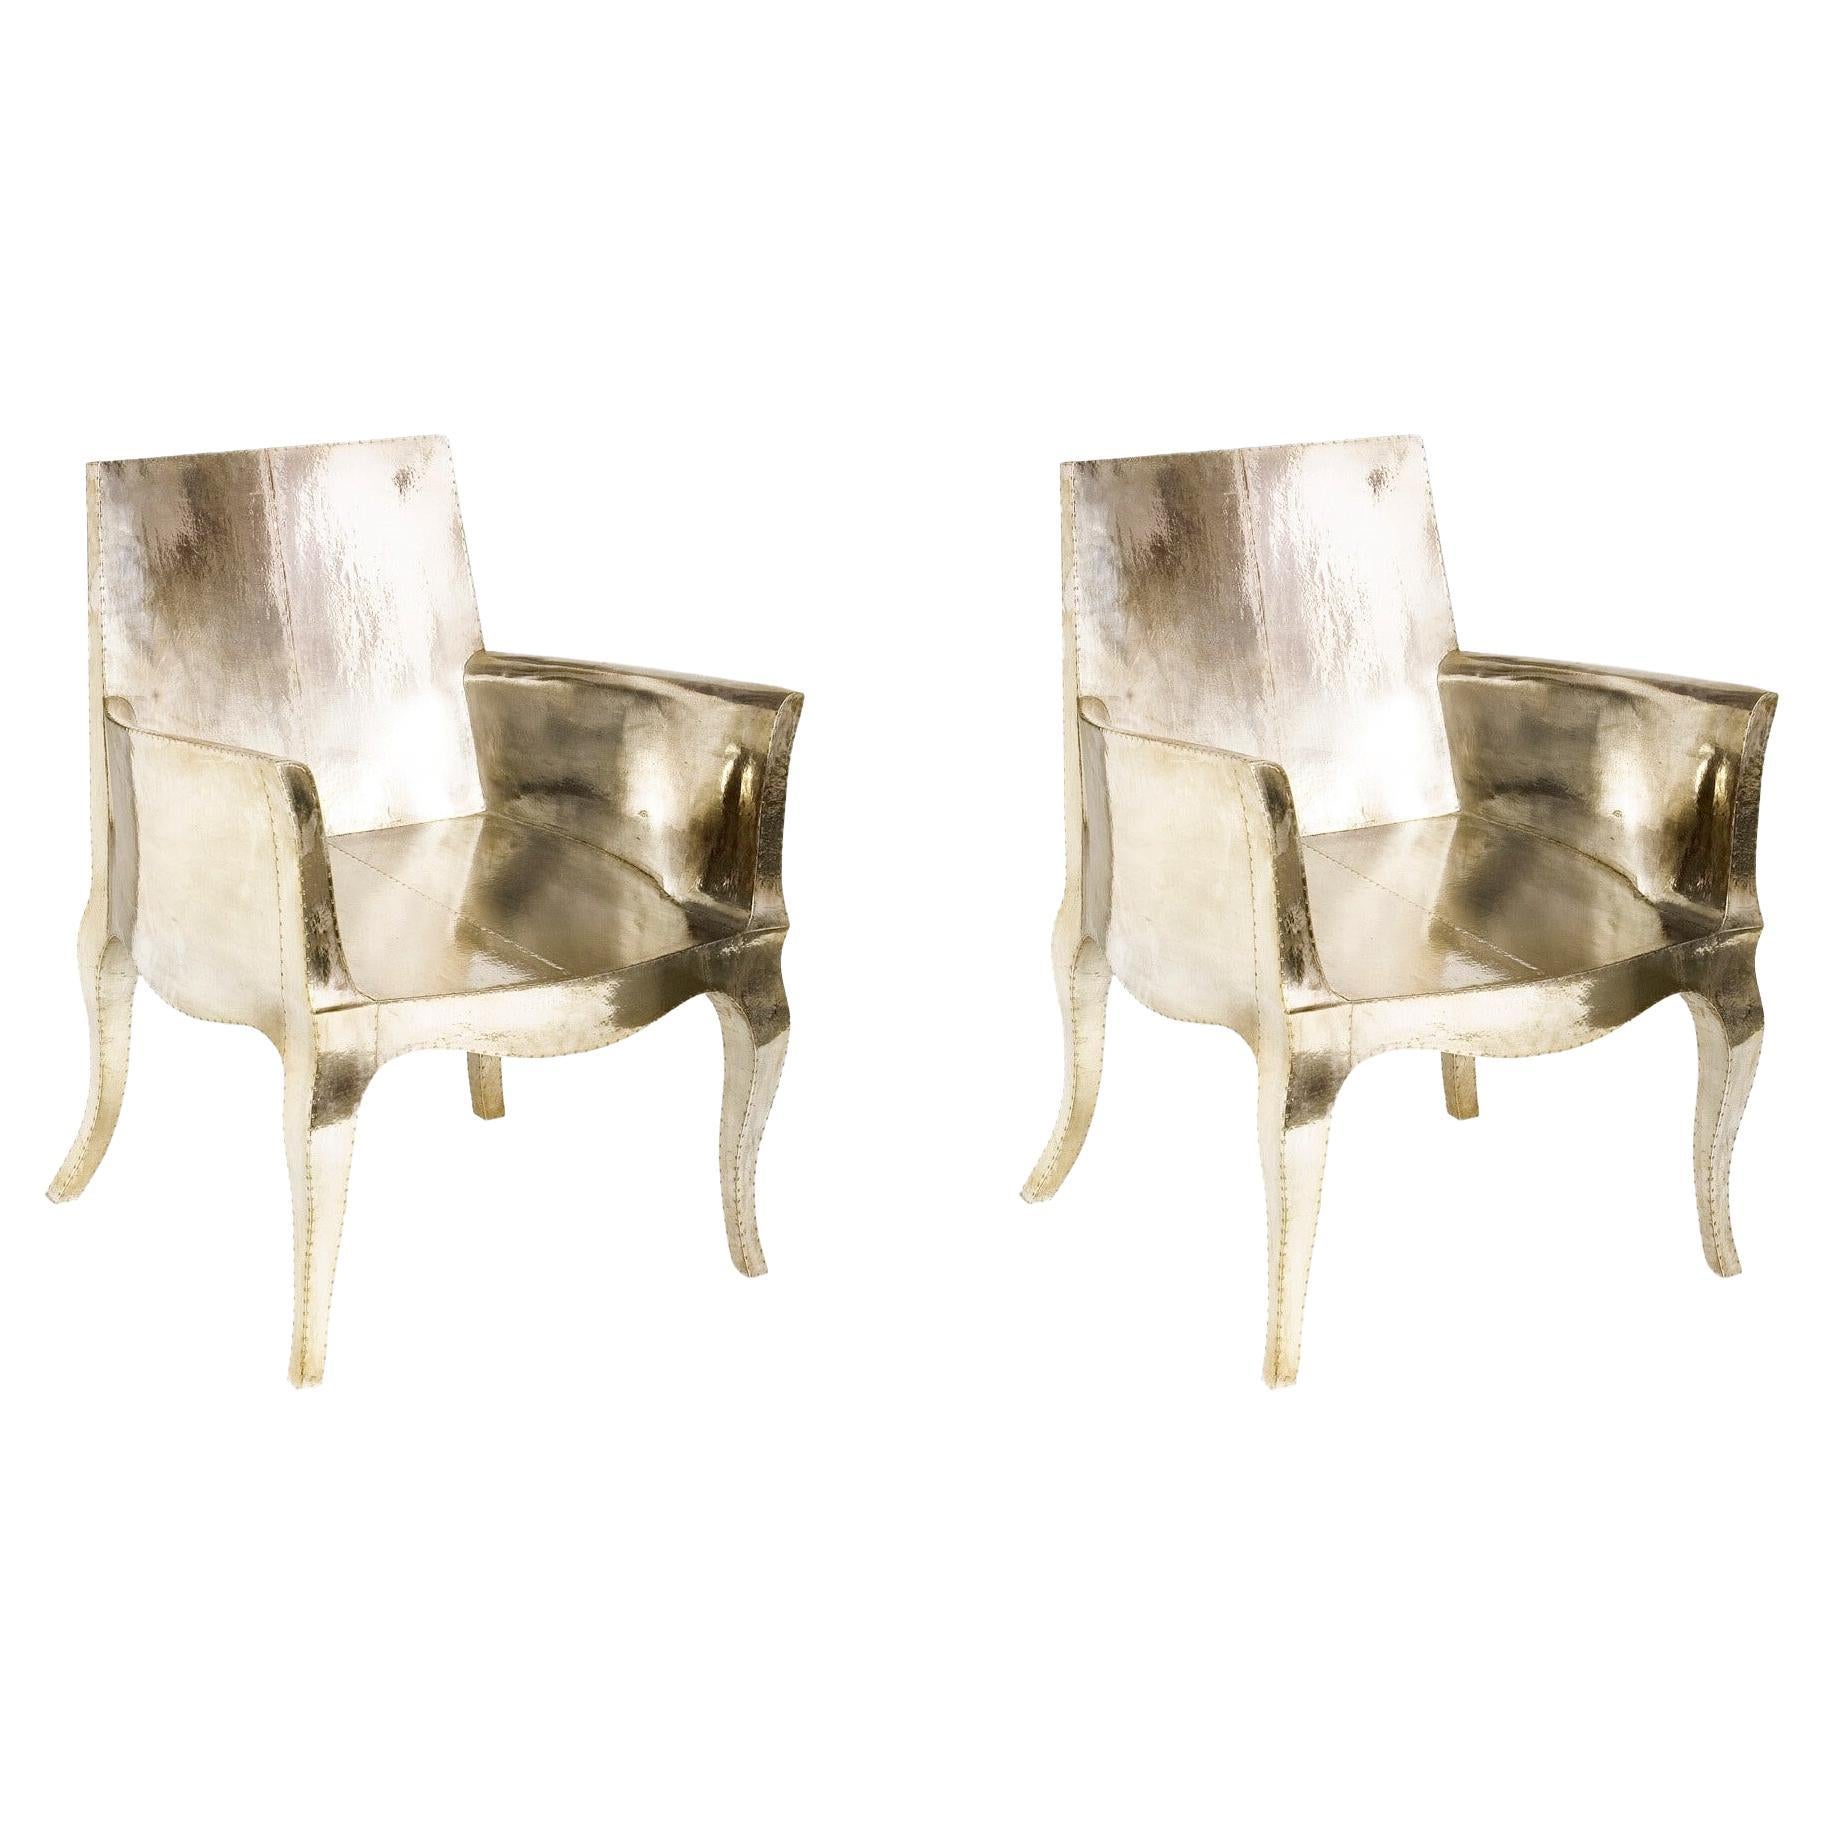 Art Deco Style Chairs Pair Designed by Paul Mathieu for Stephanie Odegard